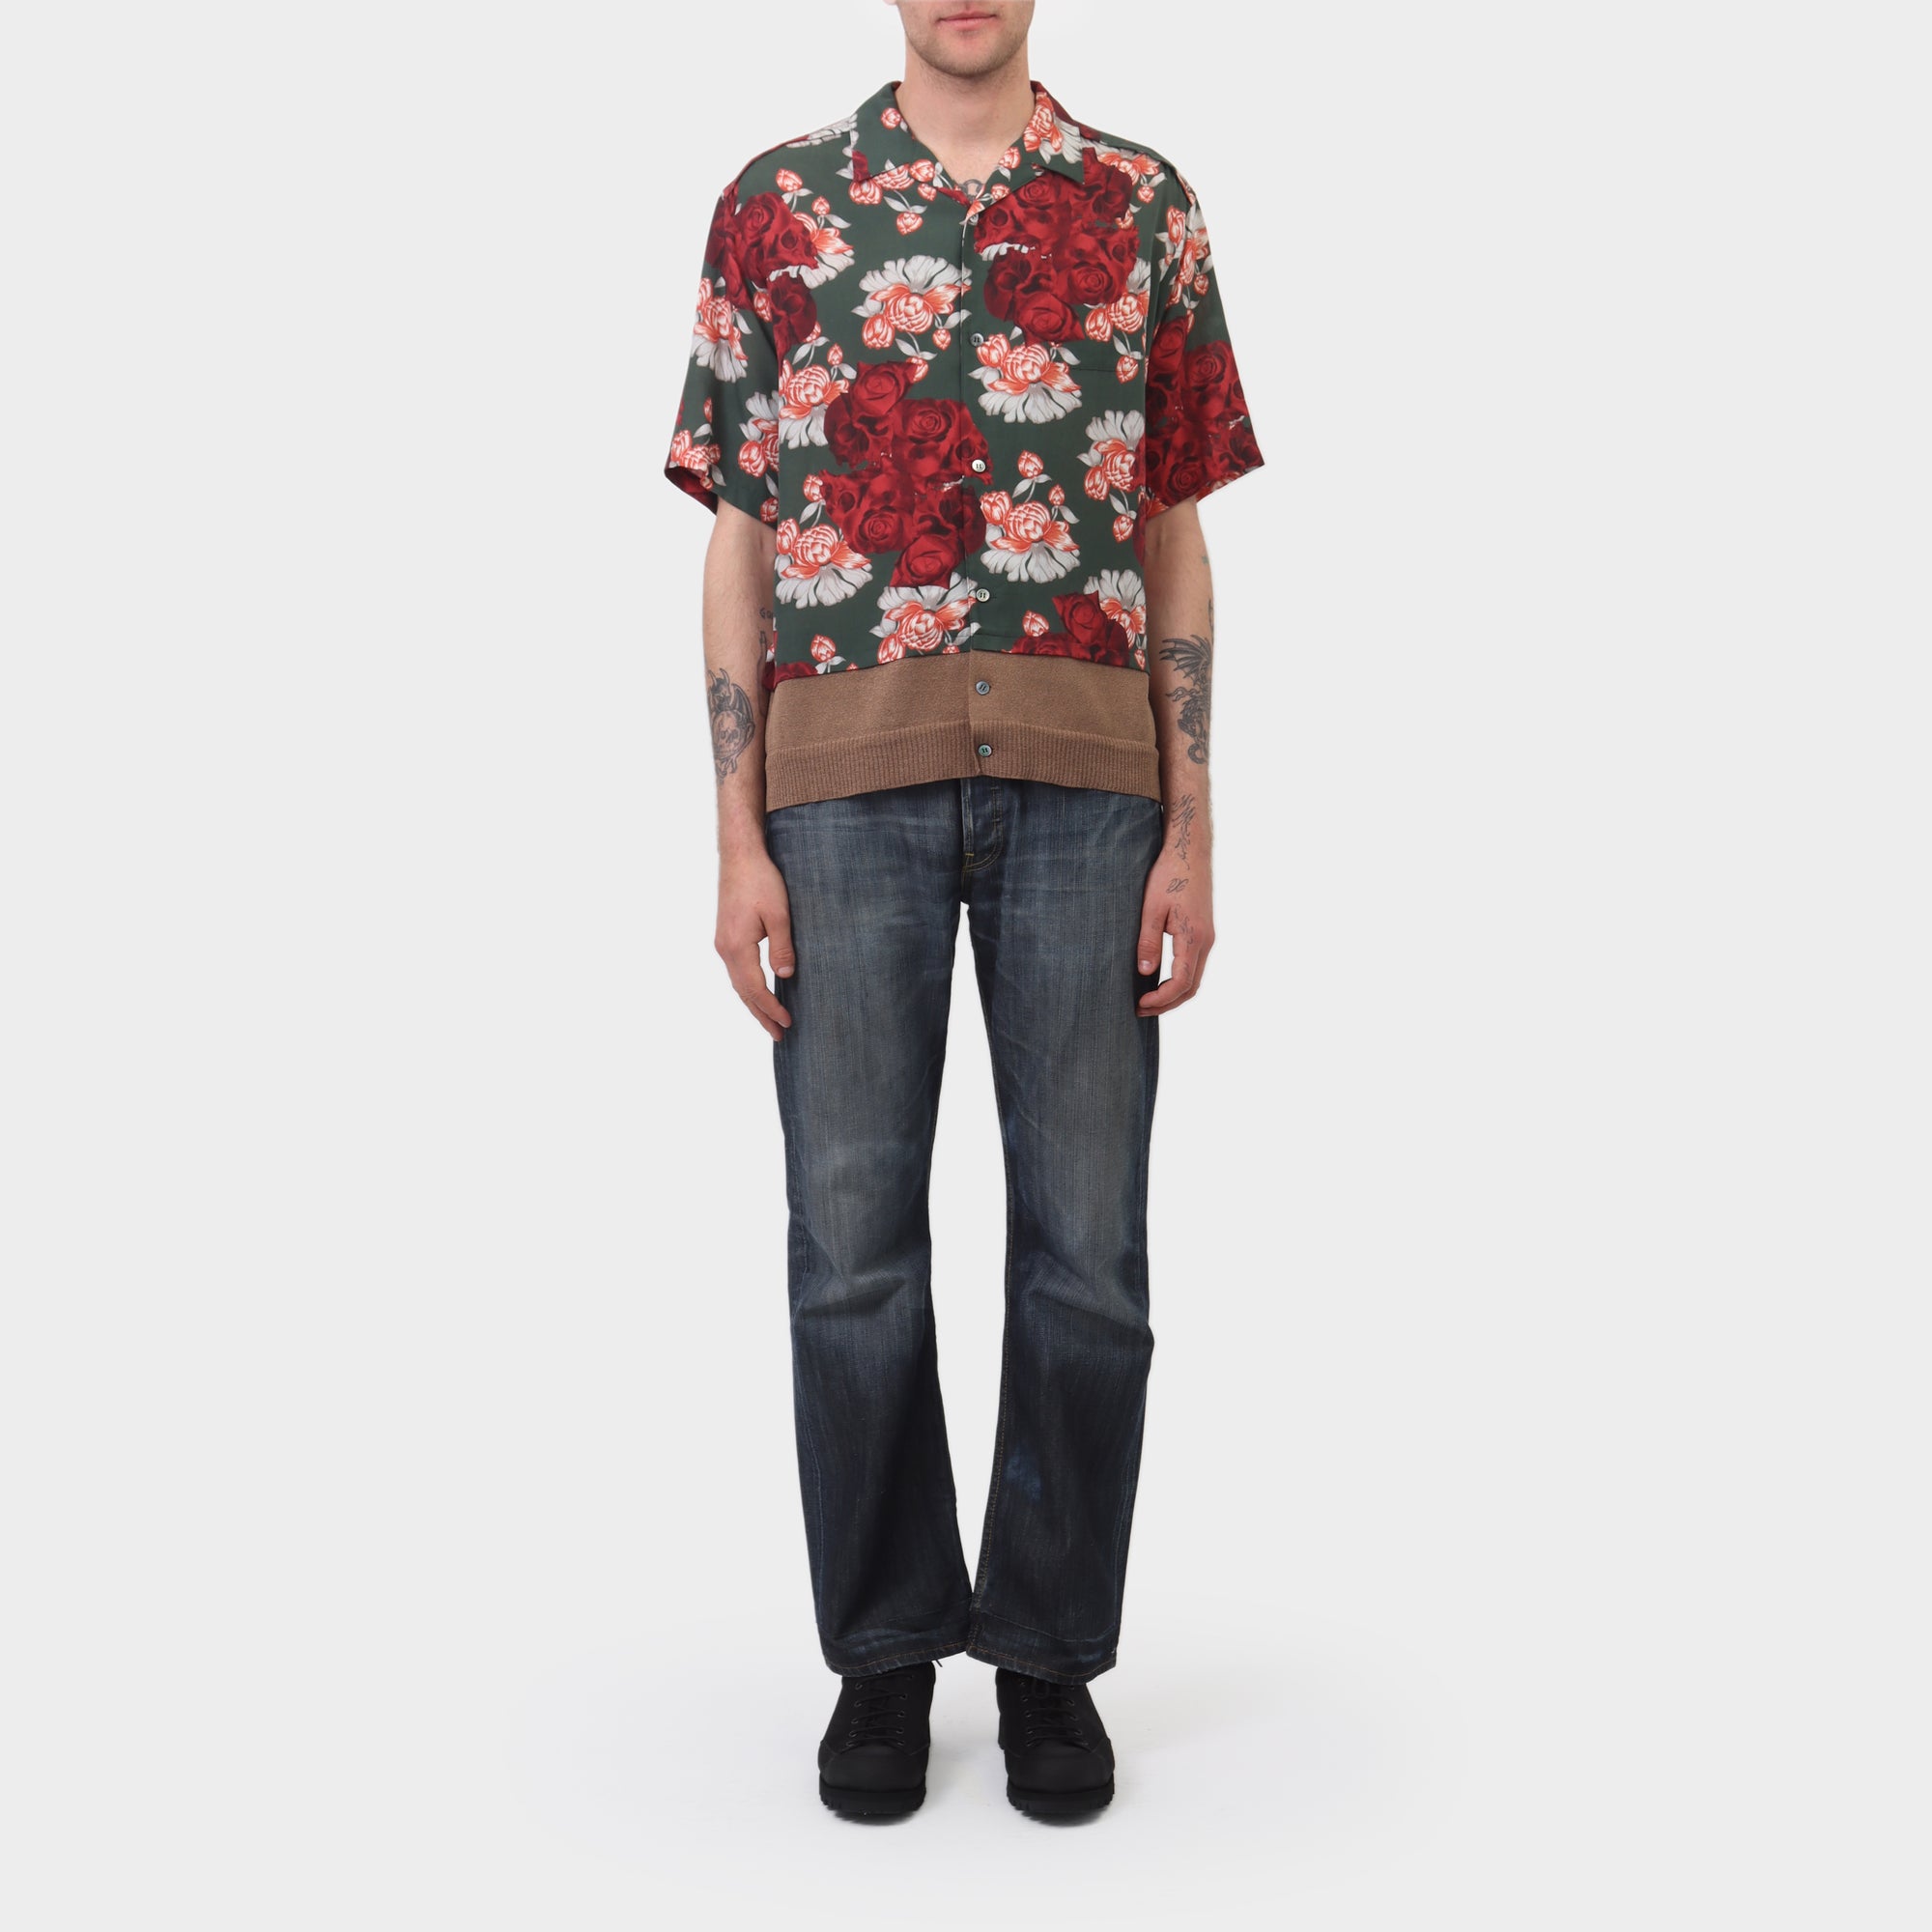 Undercover Floral Hybrid Button up Knit